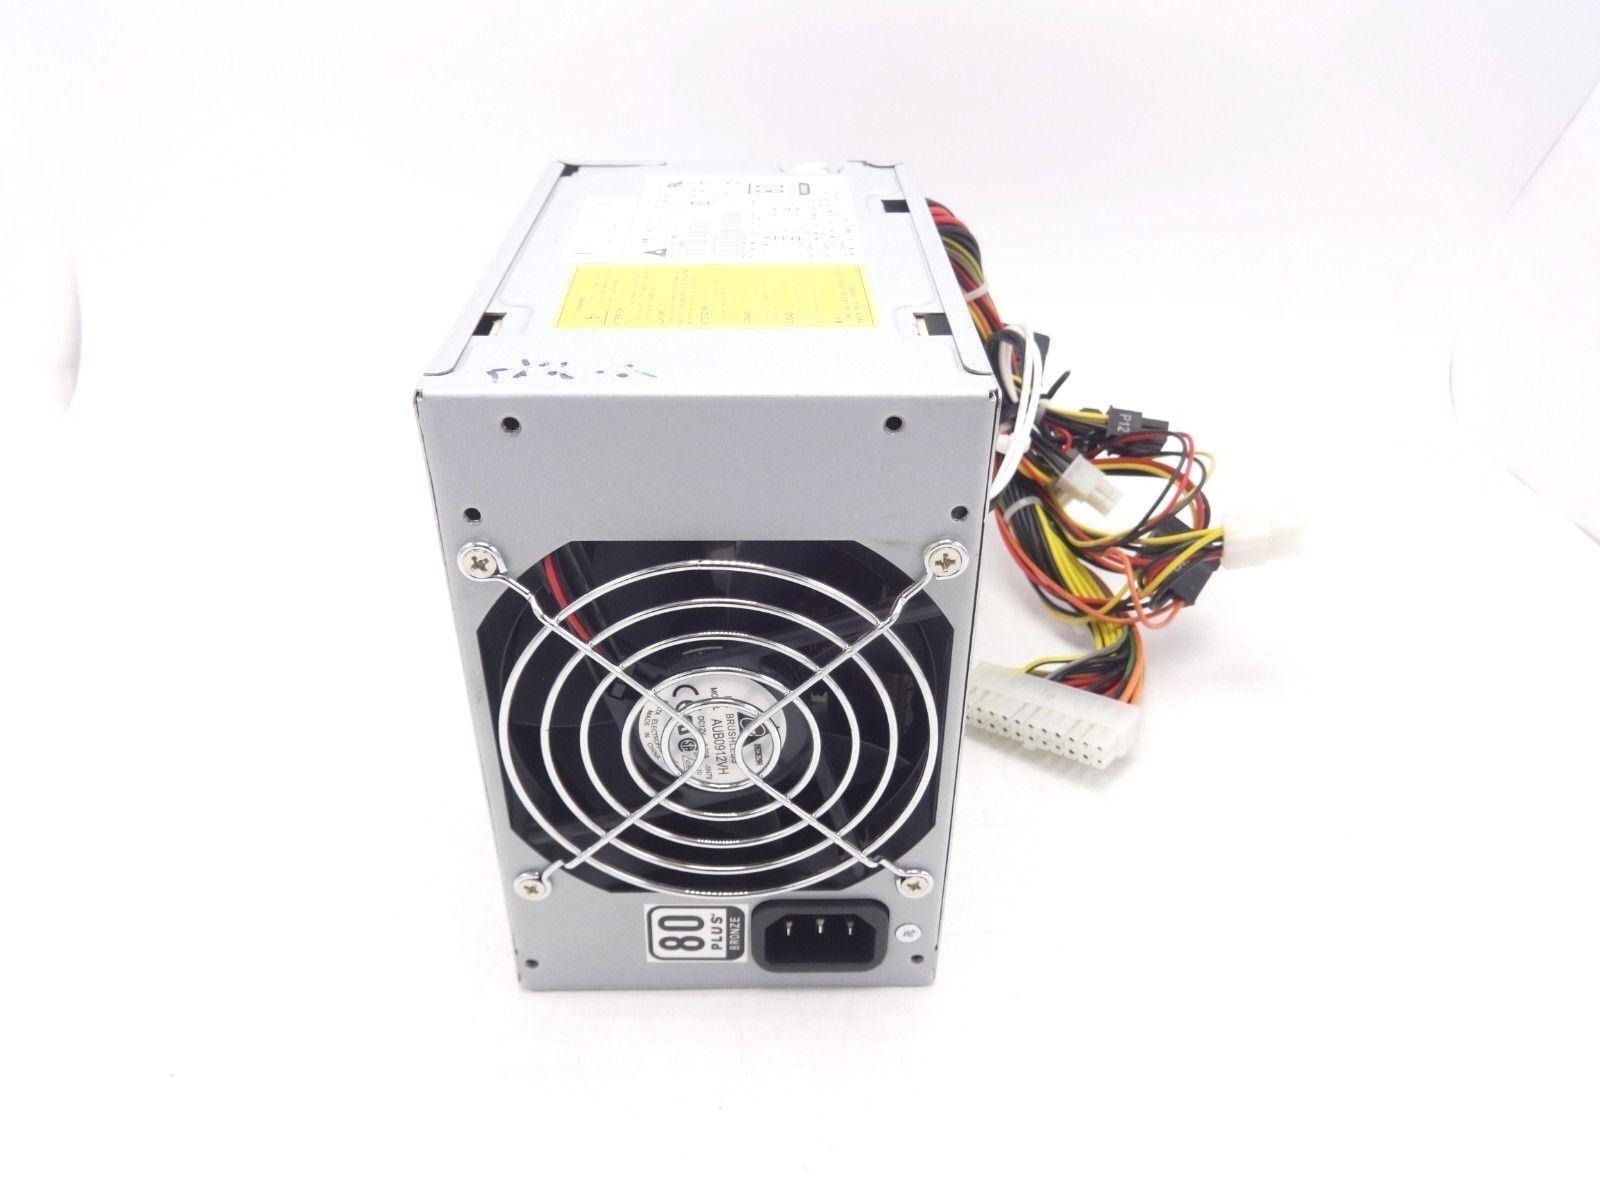 DPS 475CB 1 468930 001 480720 001 power supply 475 watt rated at 85 efficiency with built in self test bist mode